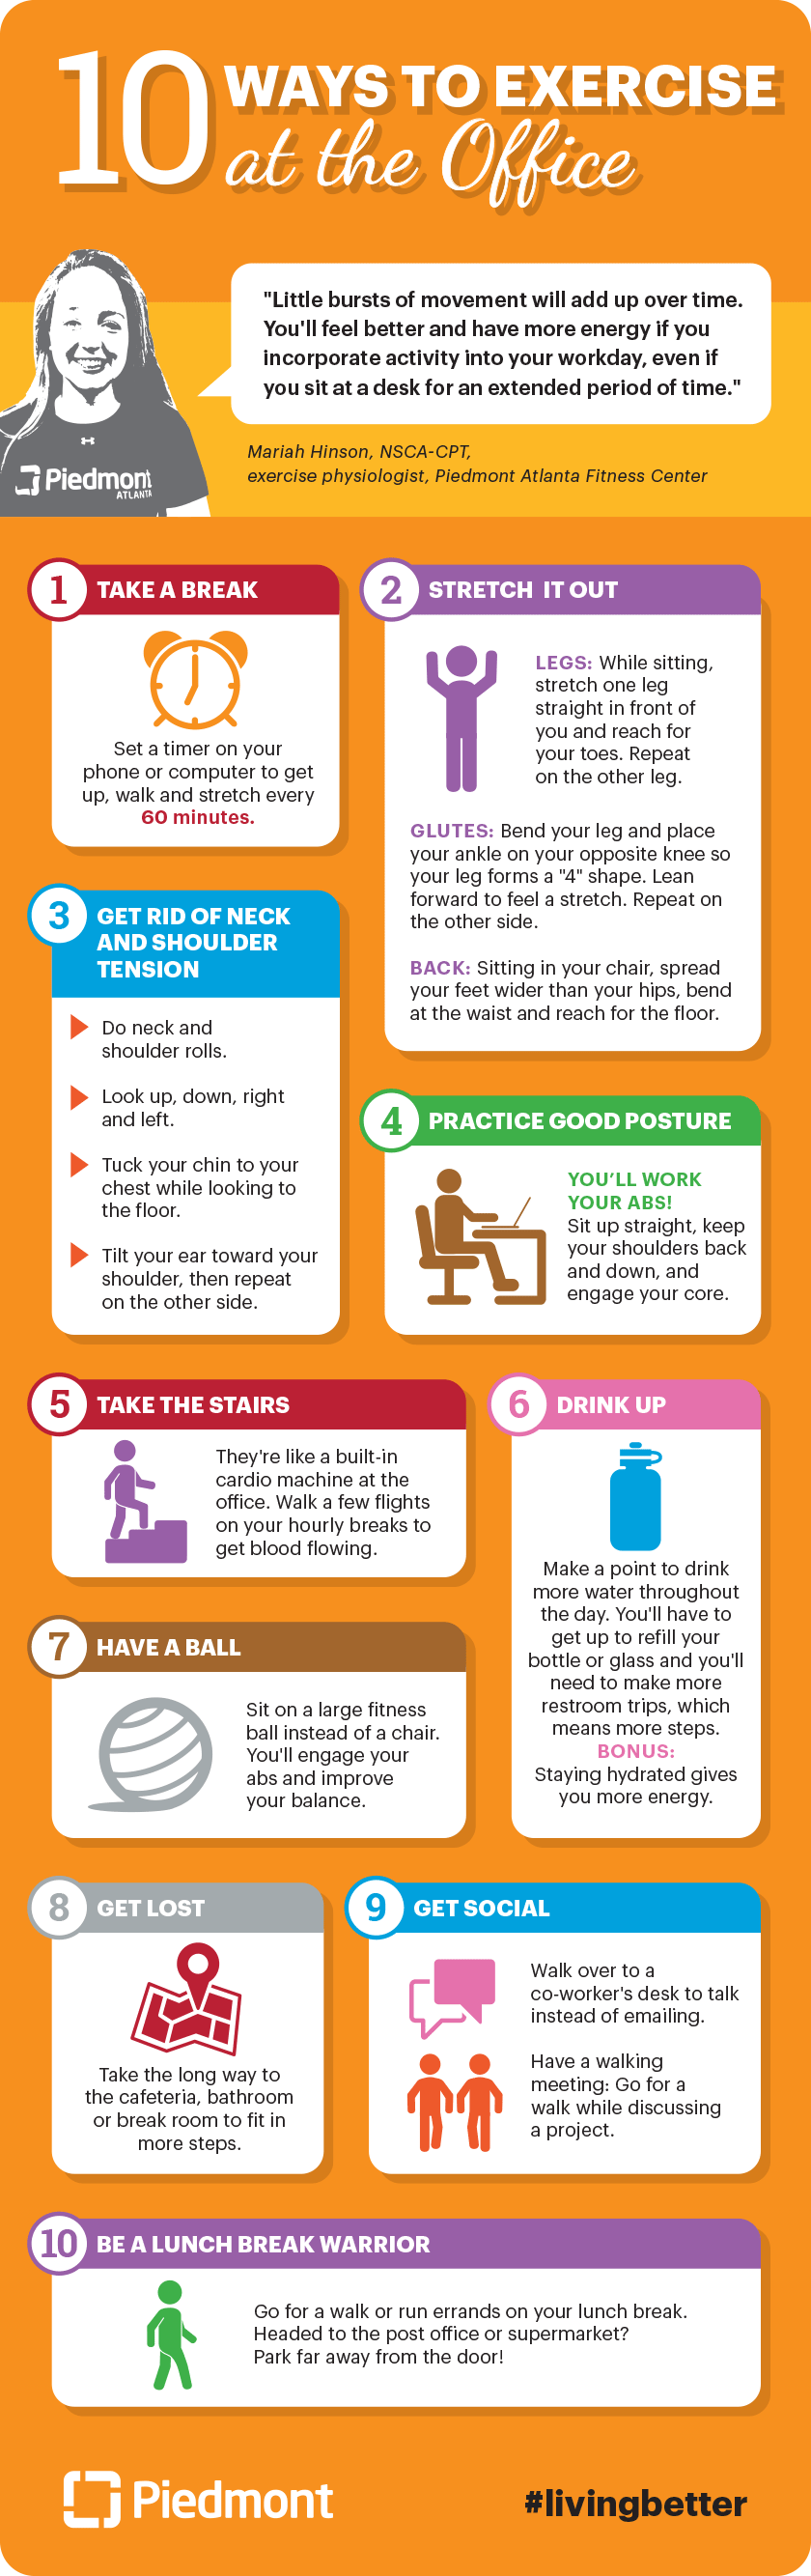 10 ways to exercise at the office 